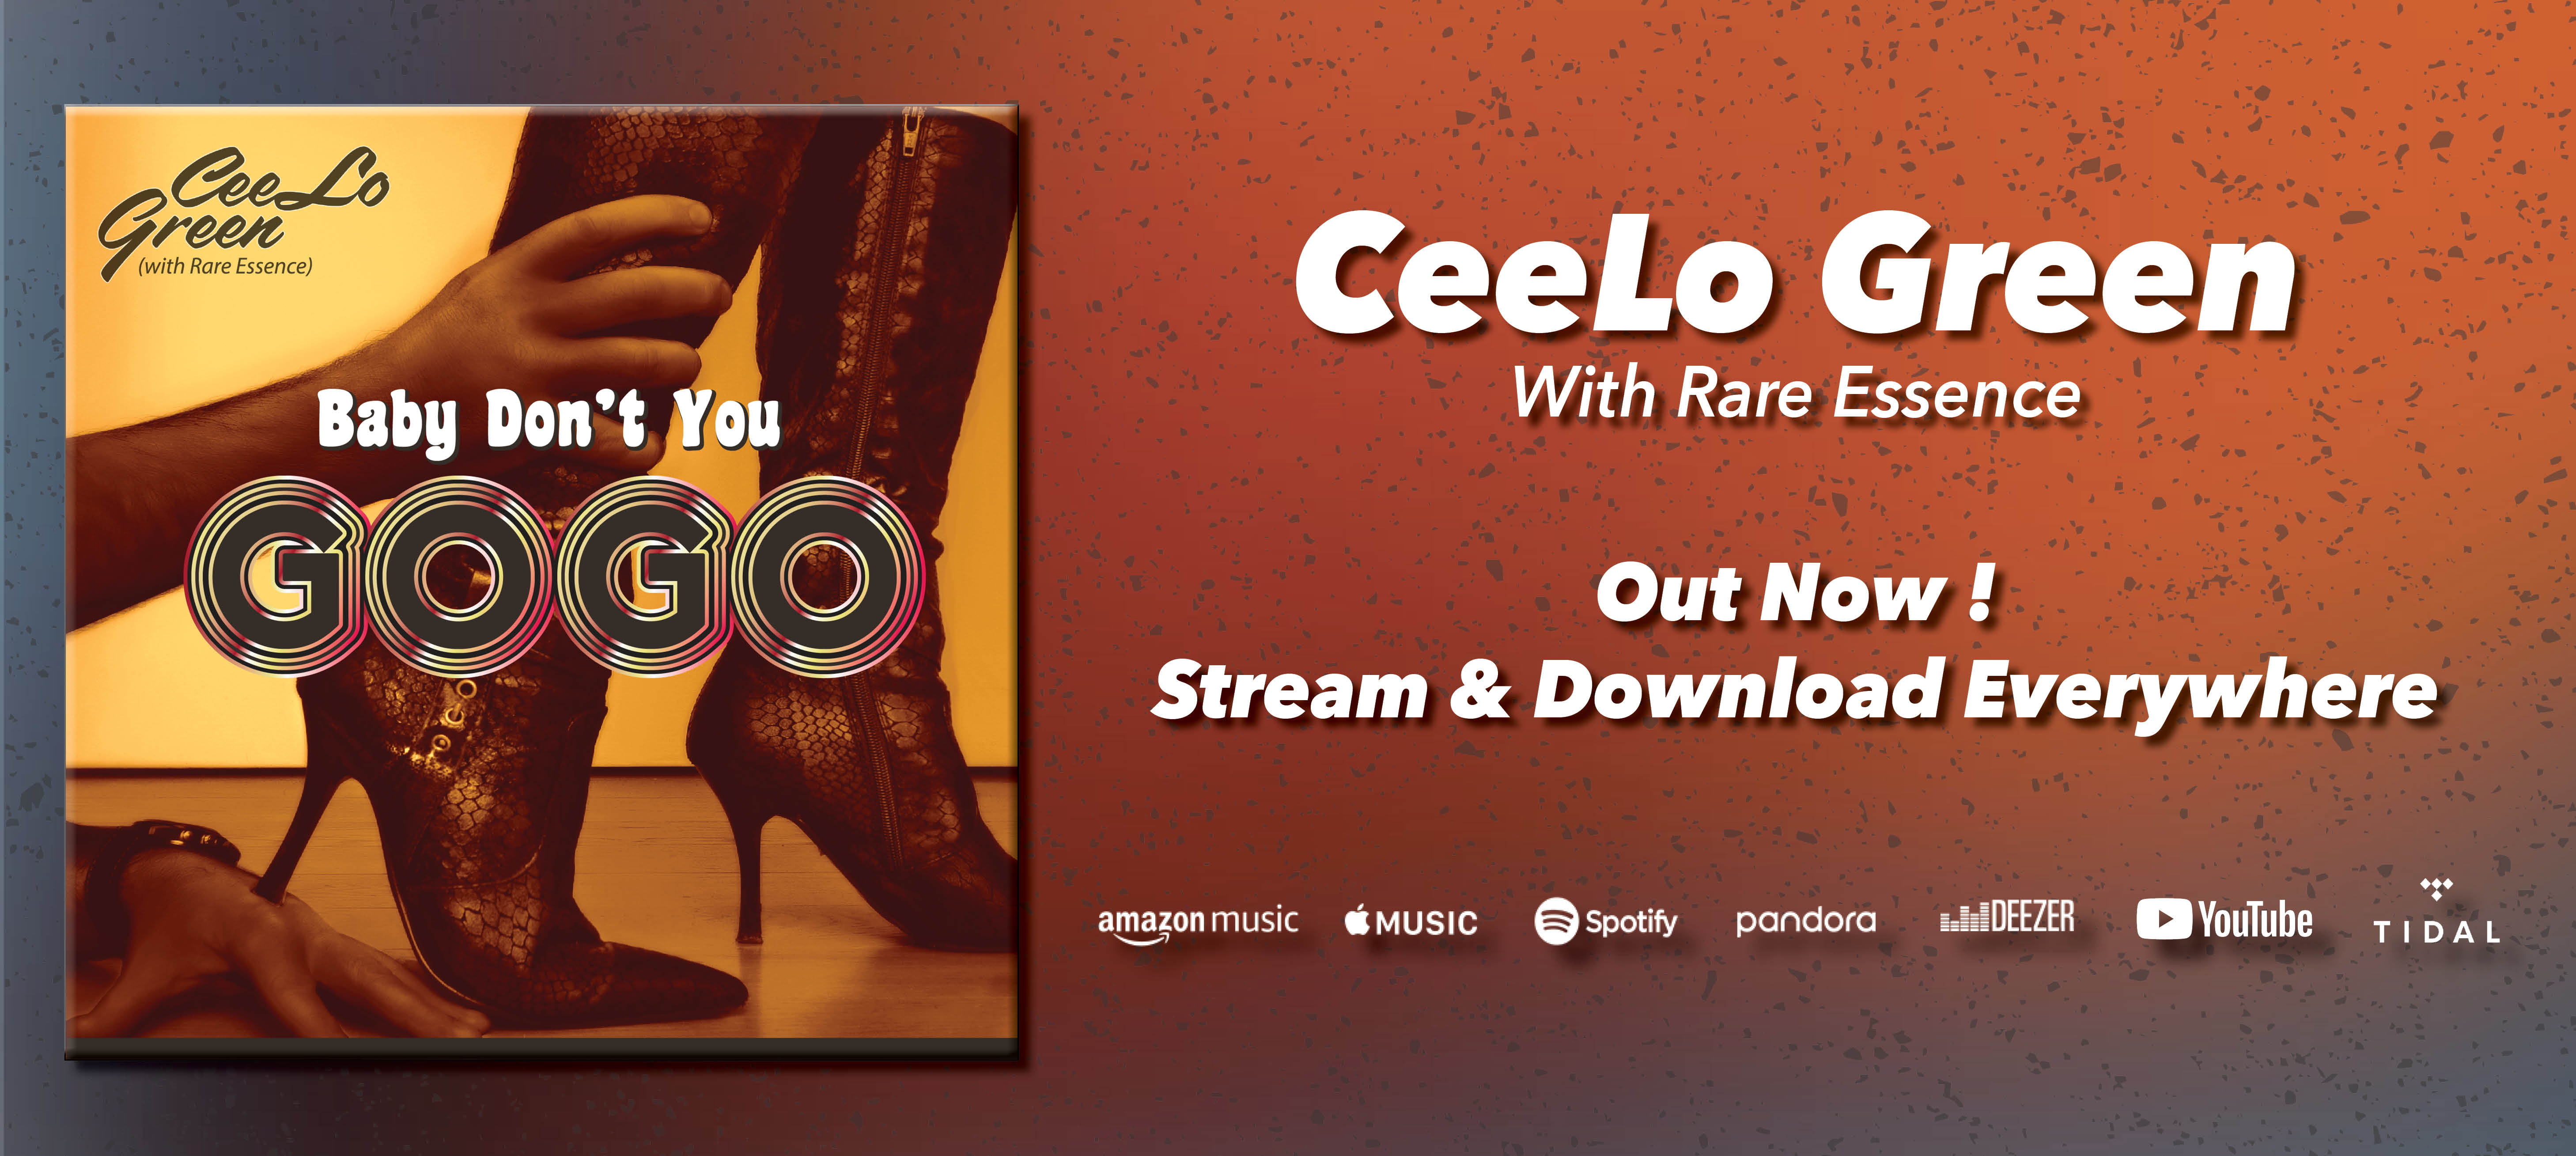 Ceelo Green with Rare Essence - Out Now!